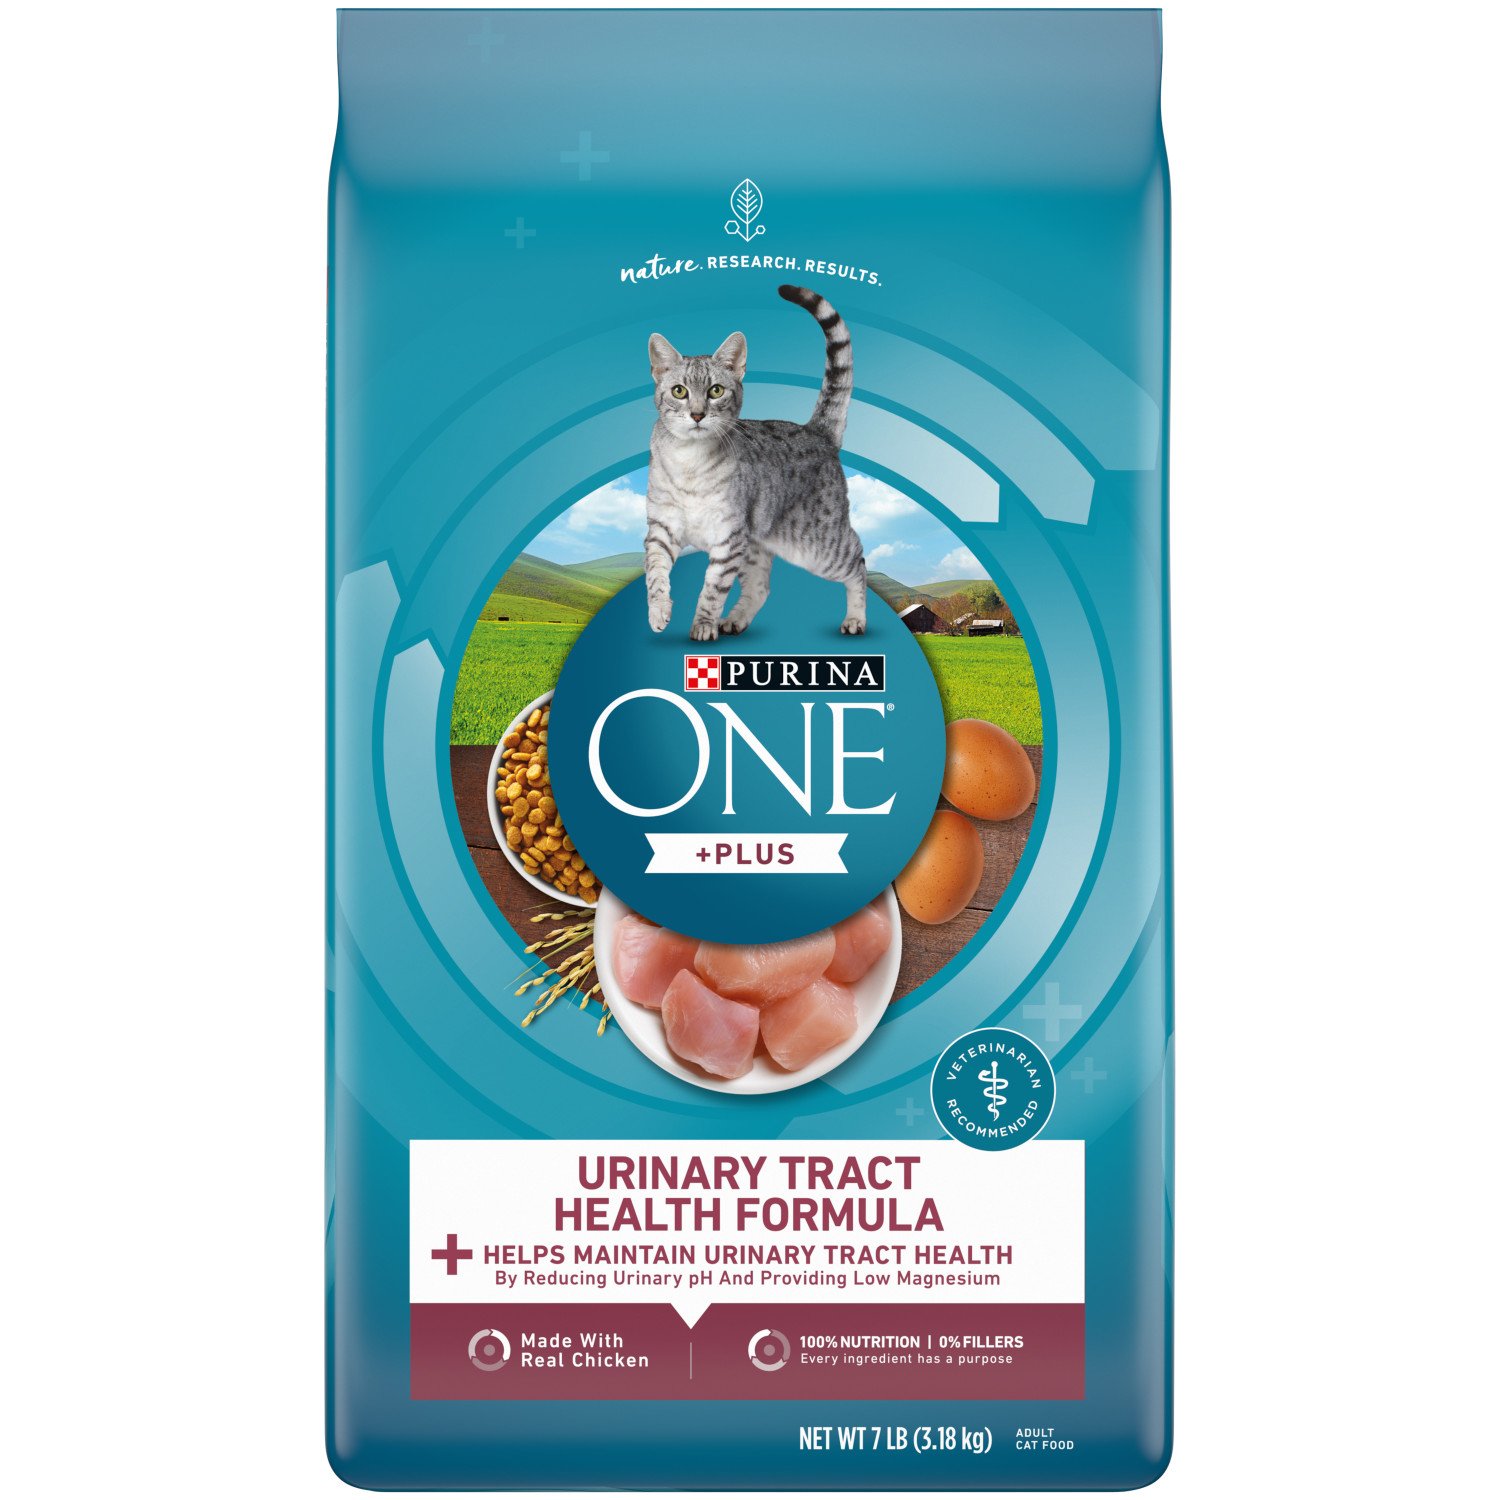 Purina ONE Special Care Urinary Tract Health Formula Adult Cat Food